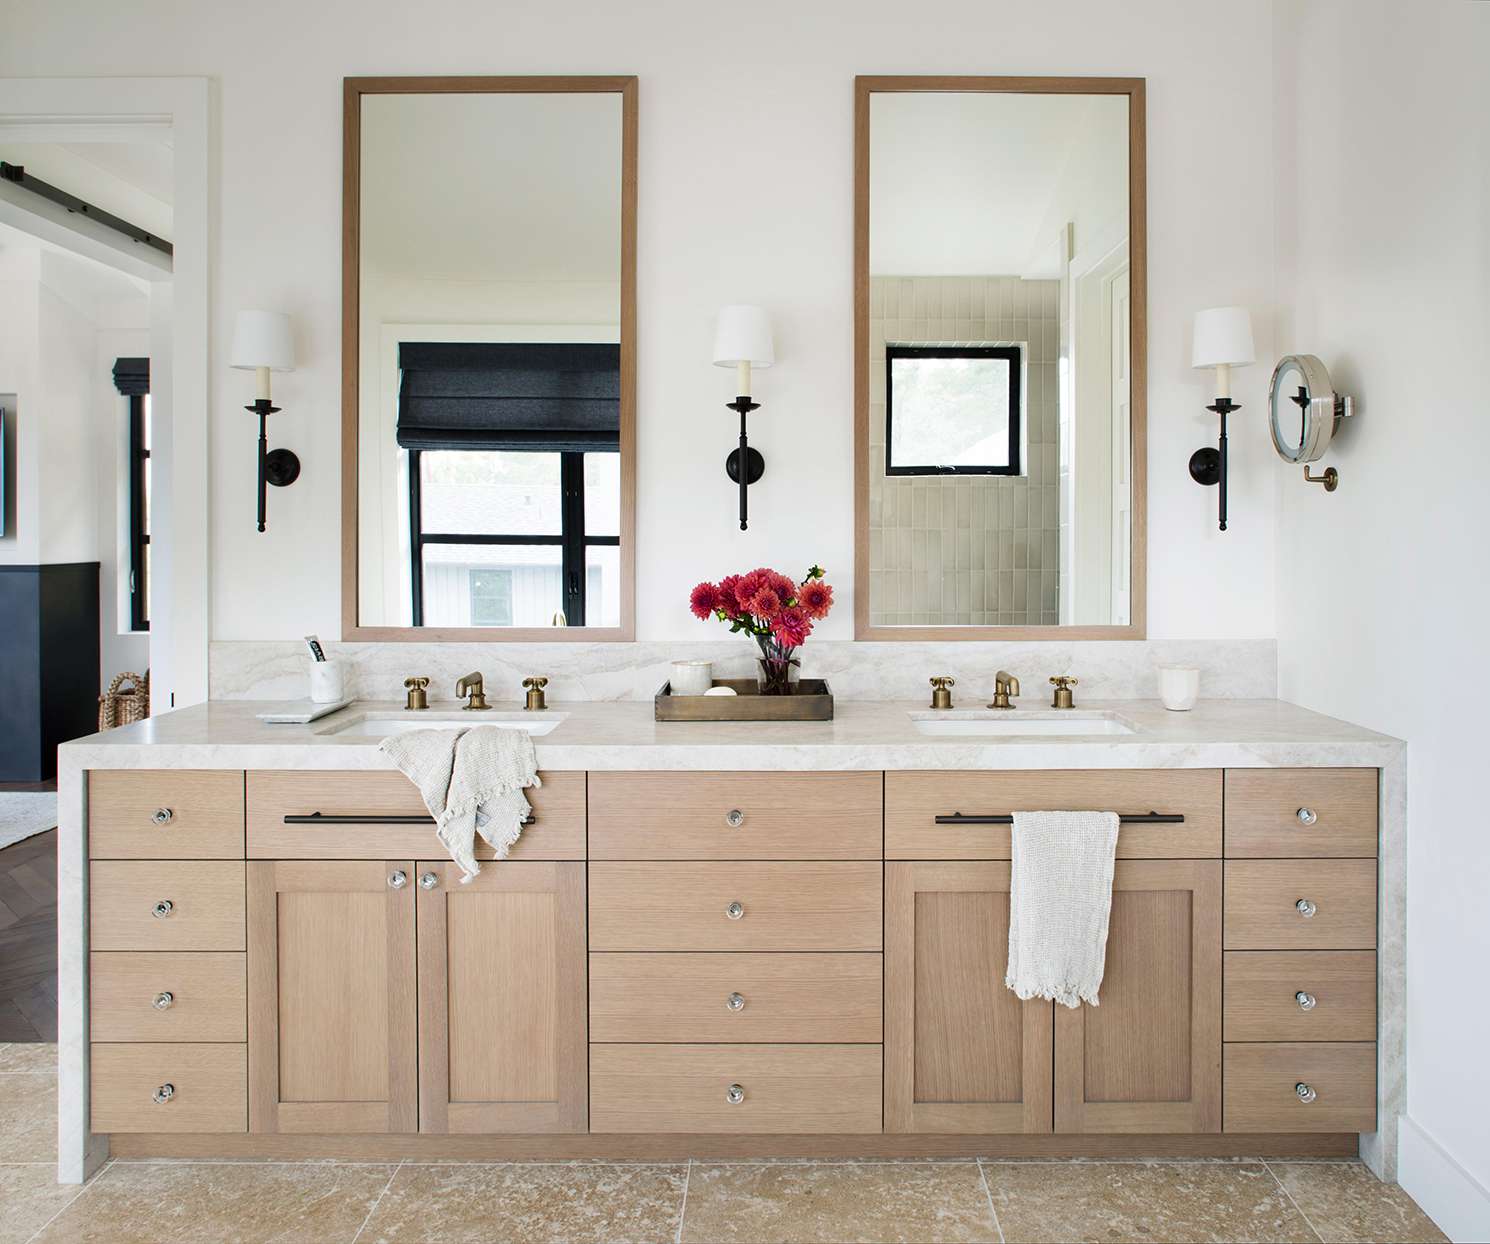 10 Common Bathroom Cleaning Mistakes to Avoid